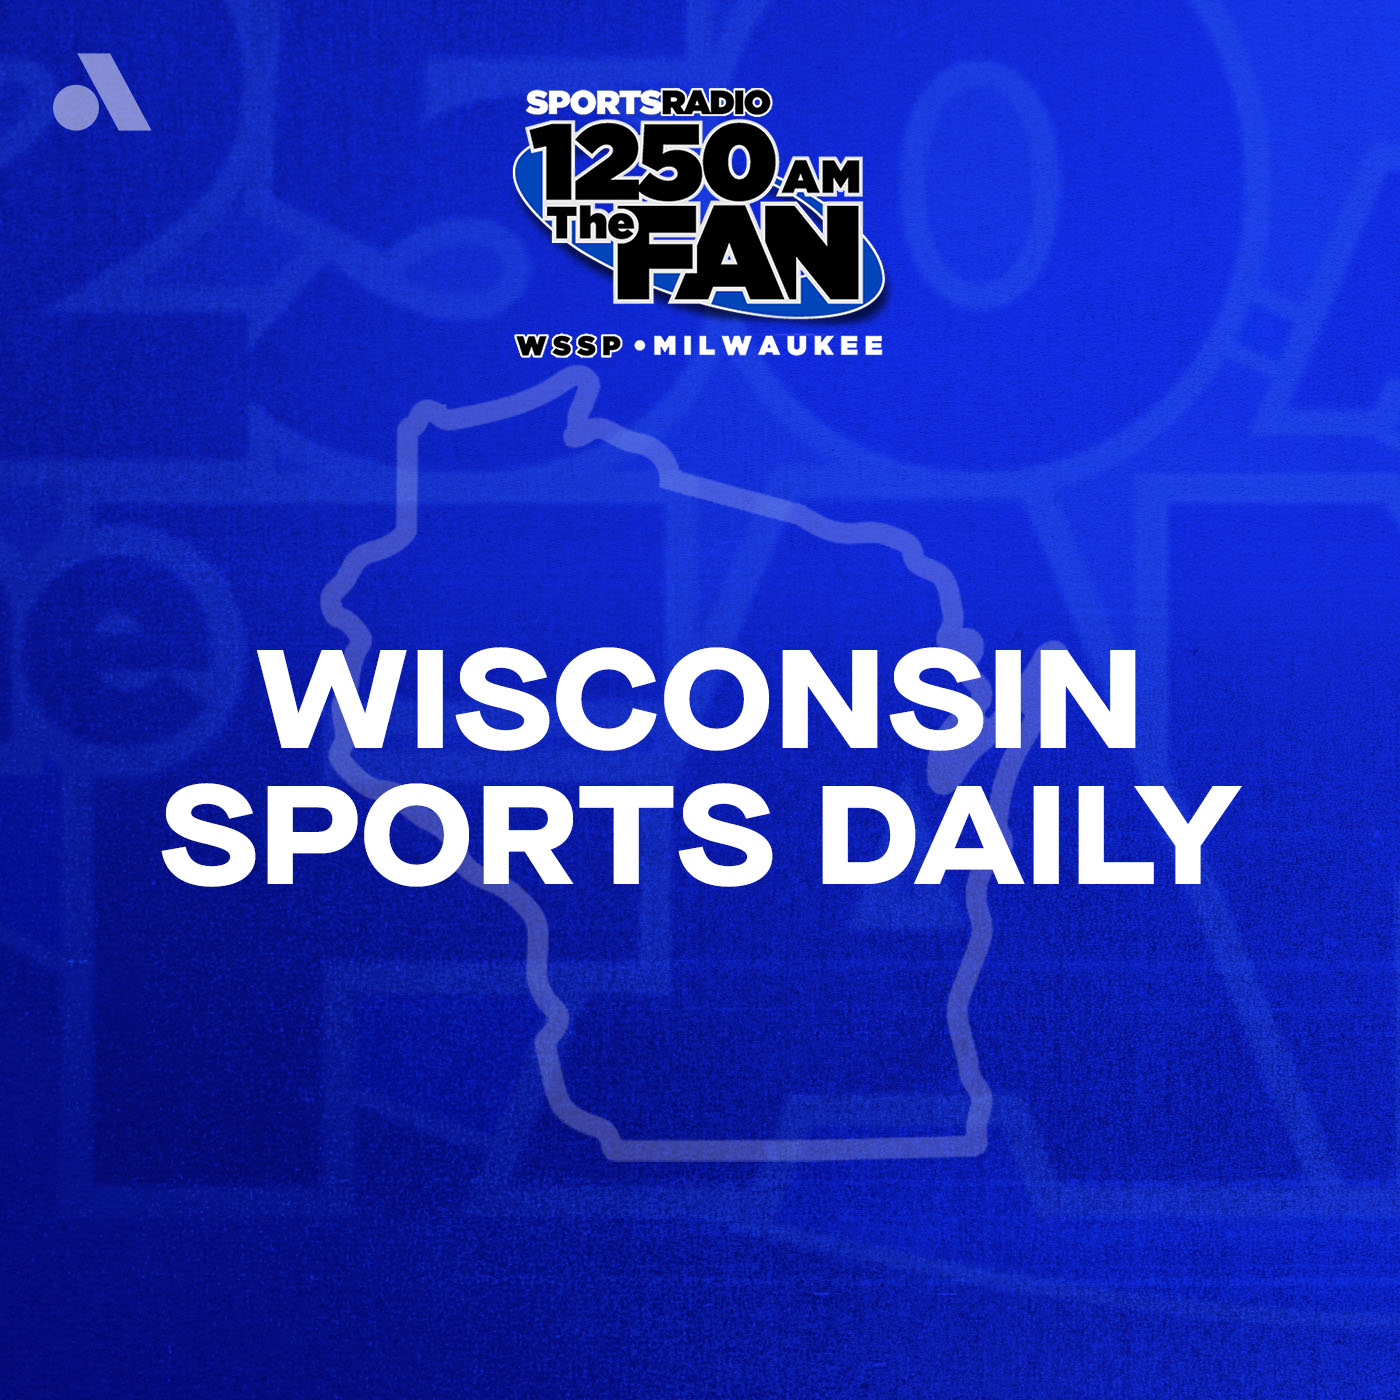 Wednesday, May 15th: Ross Uglem of Packer Report Joins Wisconsin Sports Daily